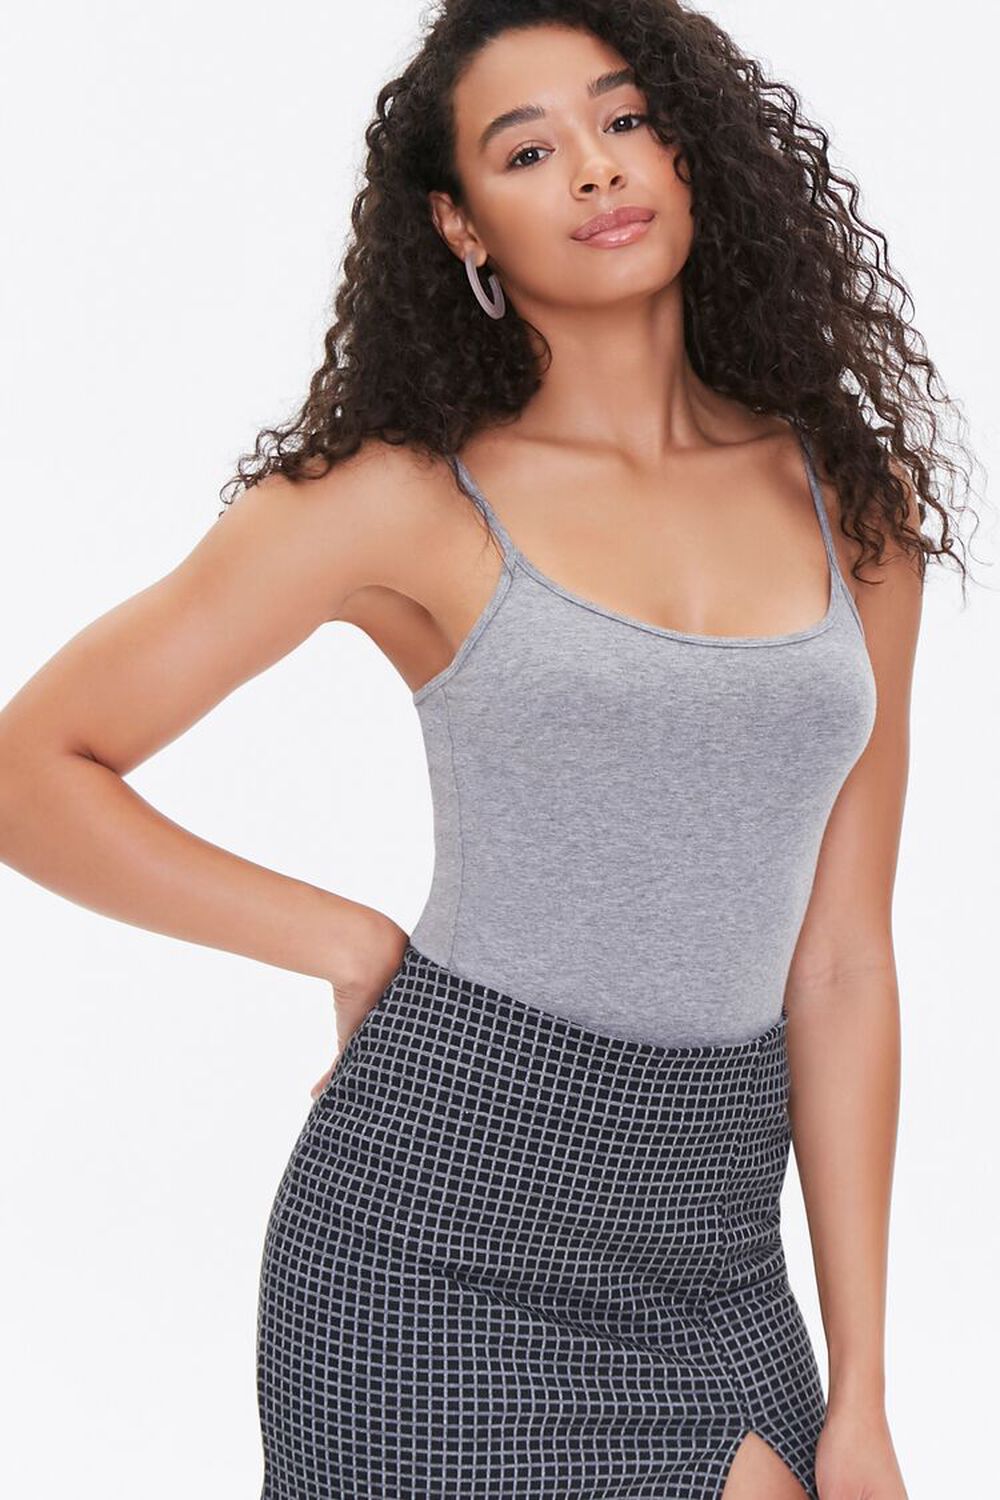 We Review: Adorable and Affordable Activewear at Forever 21 - The